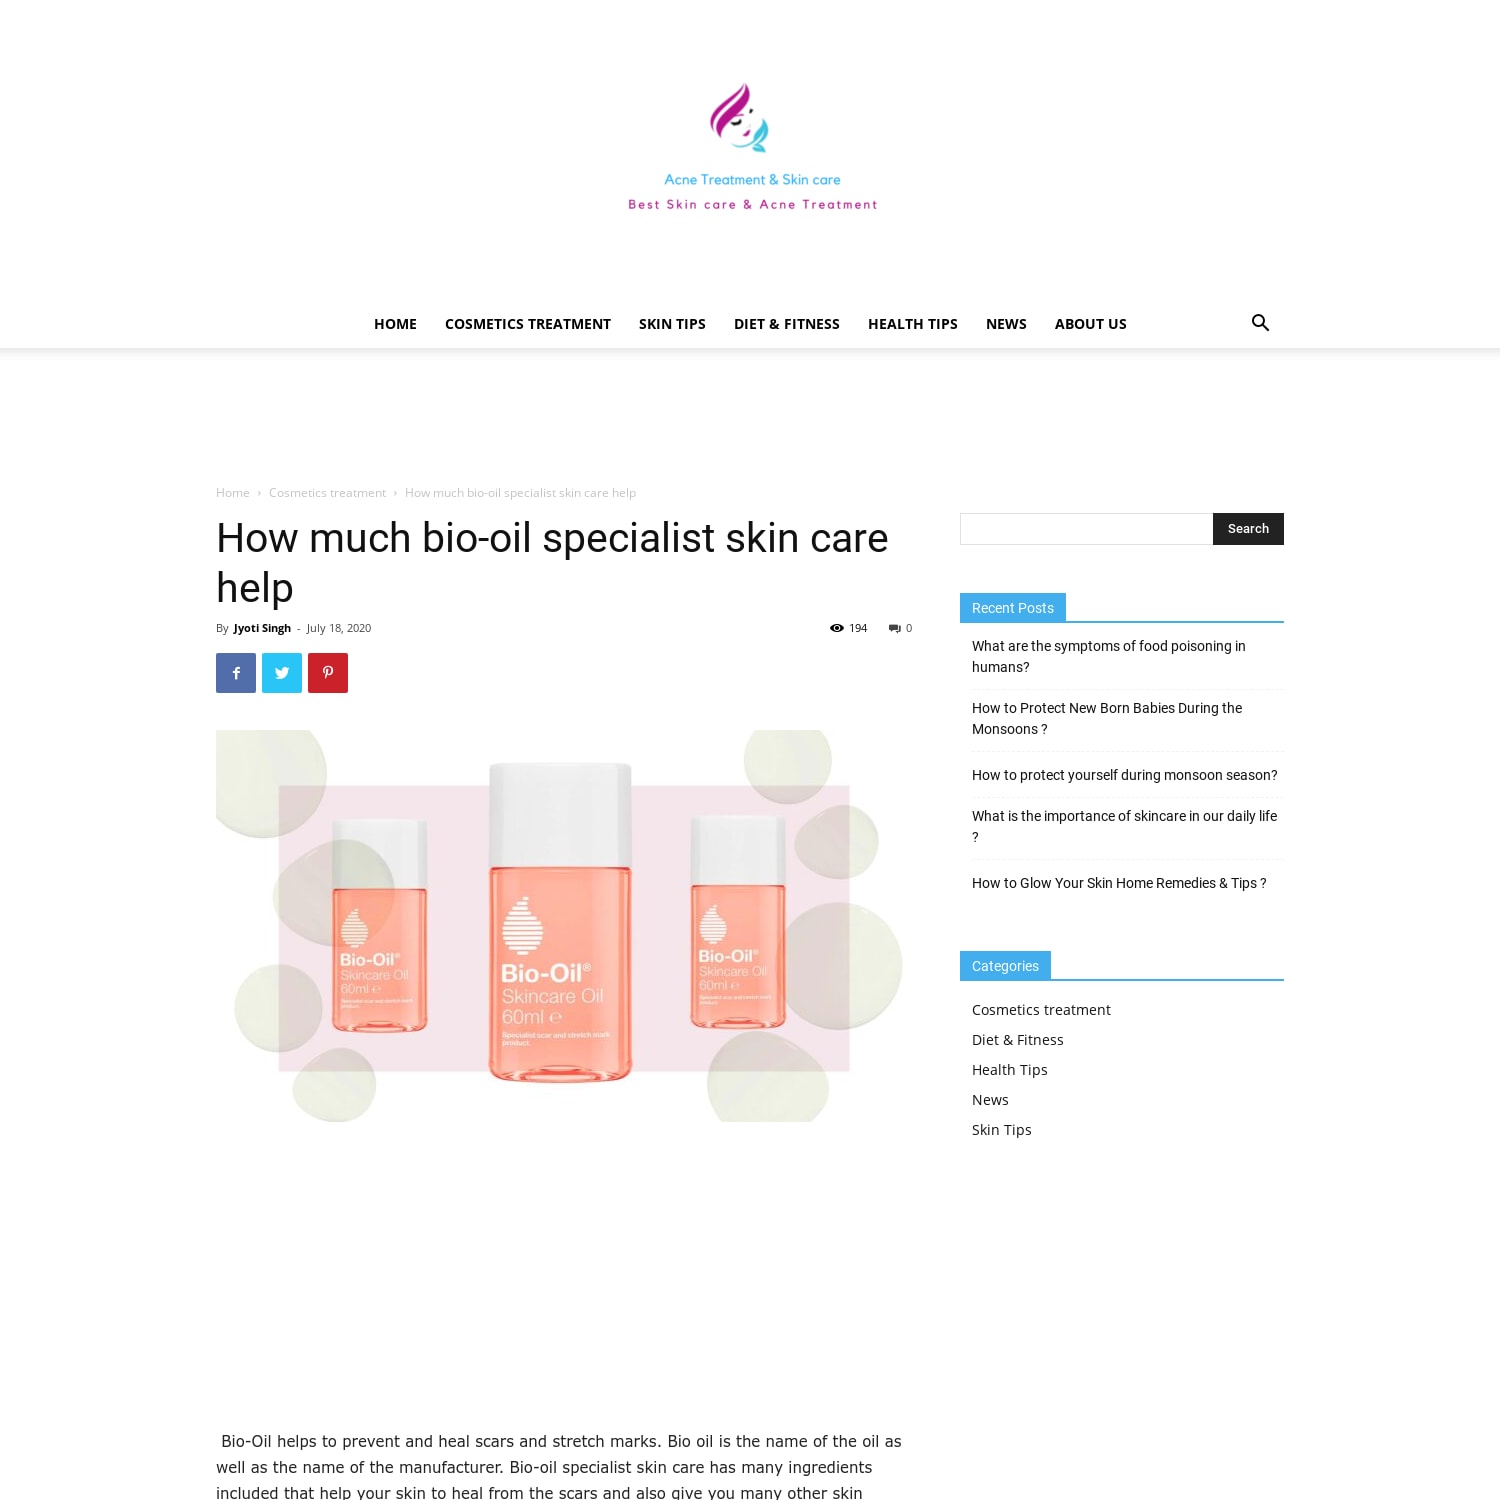 How much bio-oil specialist skin care help- Skincare & Acne Treatment